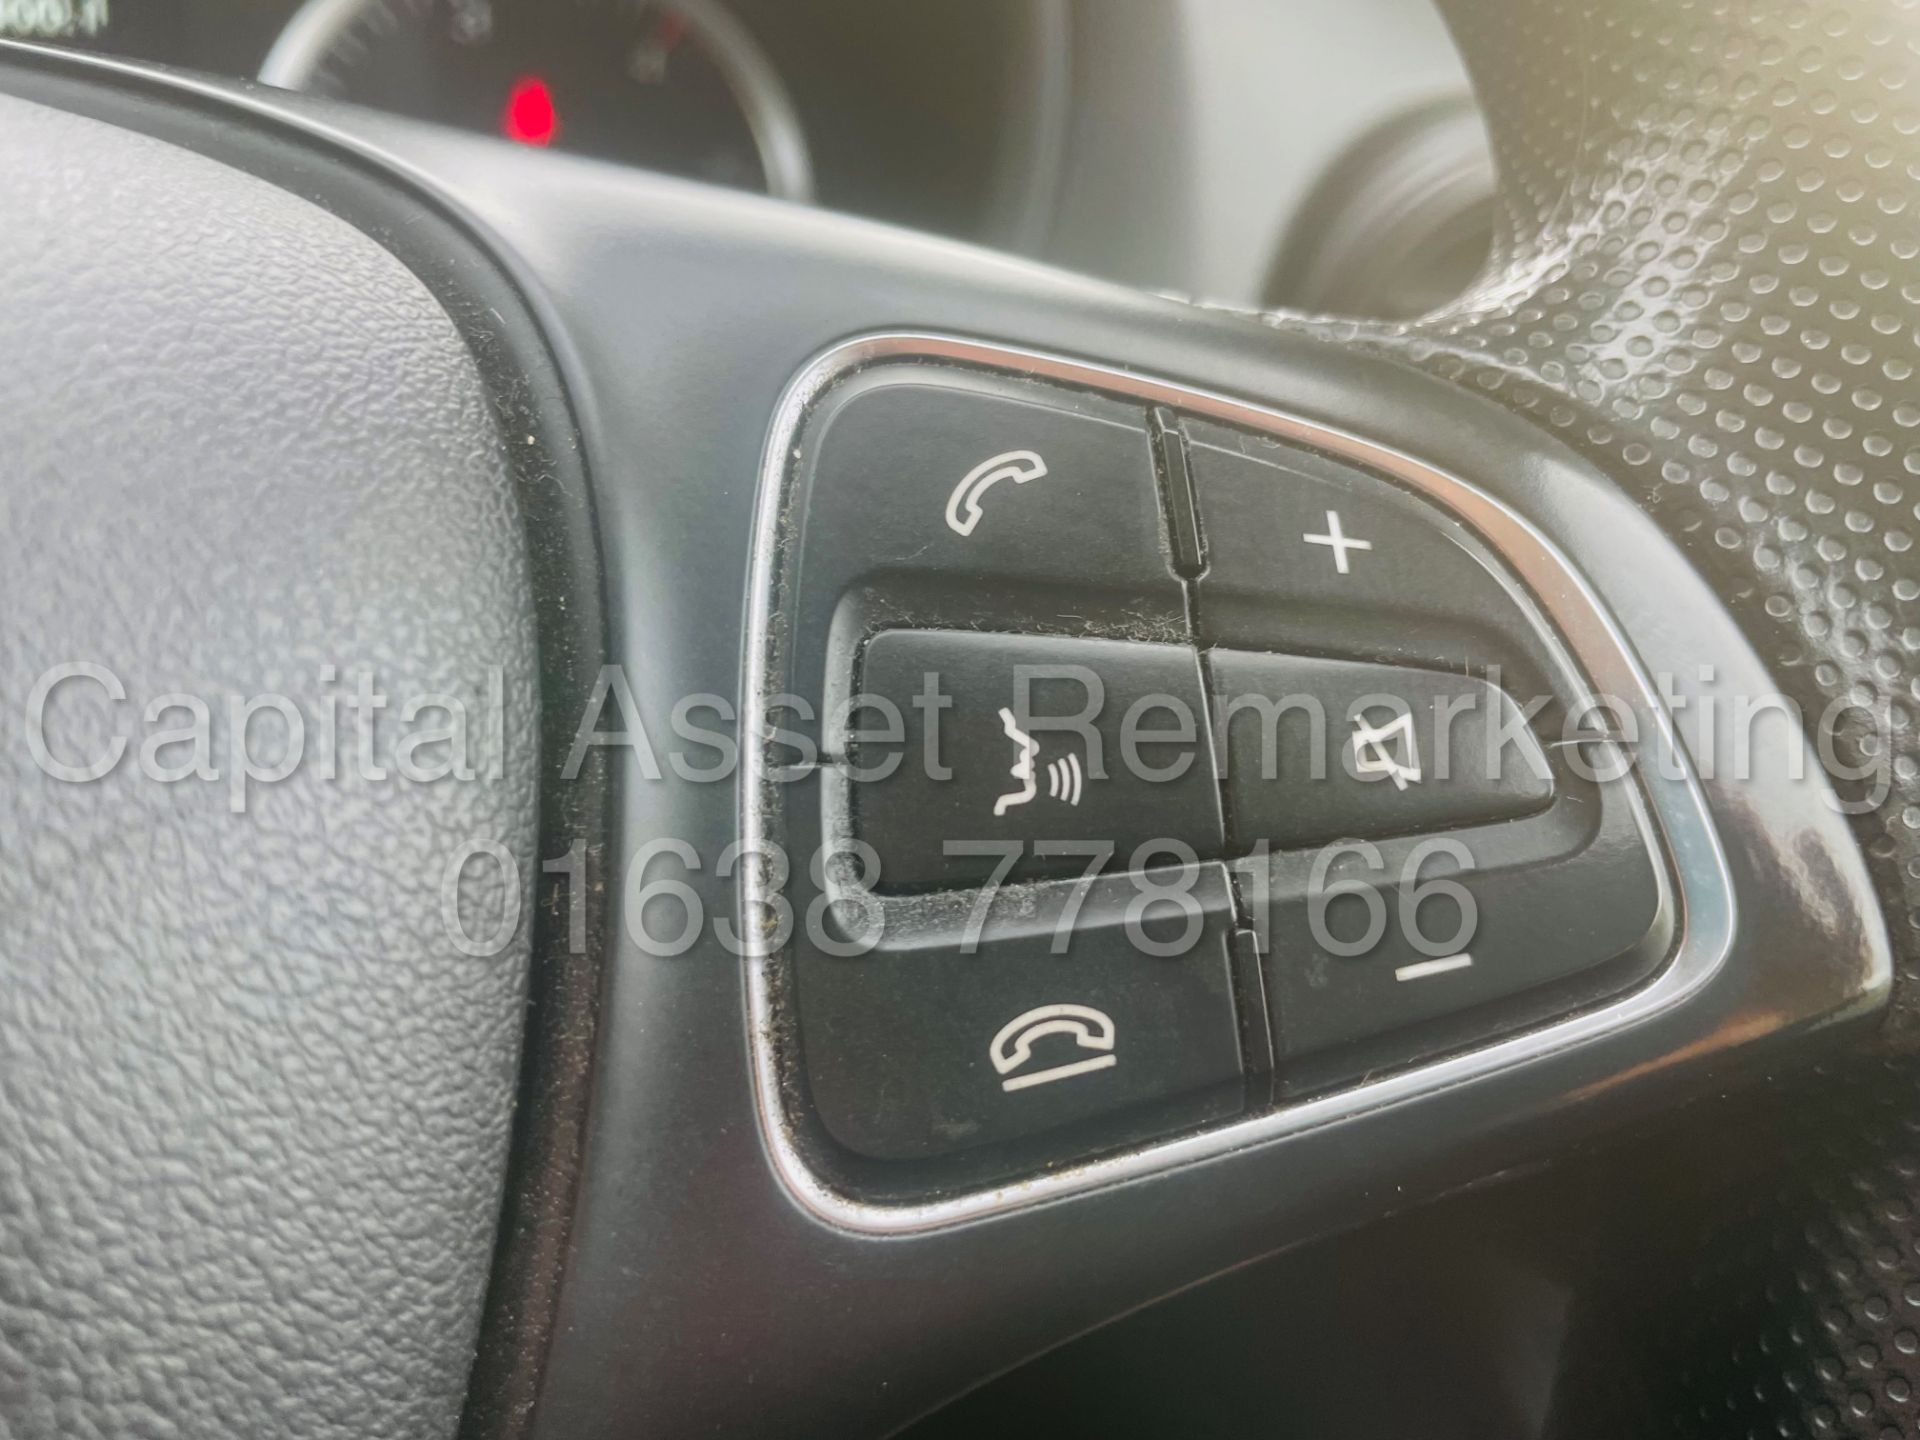 ON SALE MERCEDES-BENZ VITO CDI *LWB - PANEL VAN* (2018 - EURO 6) '6 SPEED - CRUISE CONTROL (1 OWNER) - Image 42 of 43